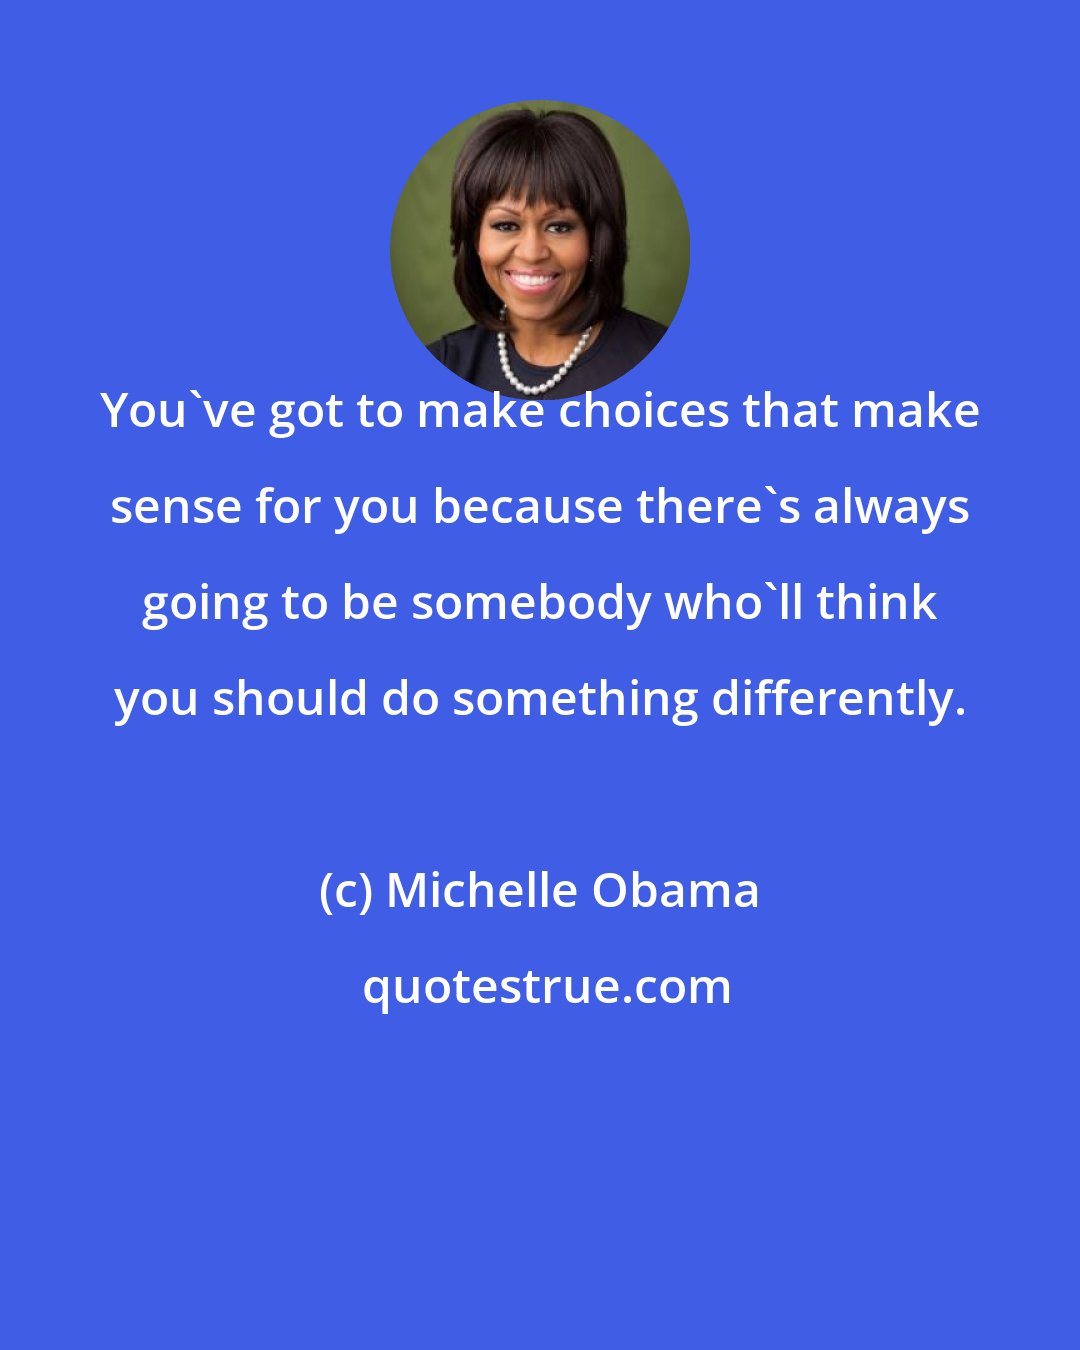 Michelle Obama: You've got to make choices that make sense for you because there's always going to be somebody who'll think you should do something differently.